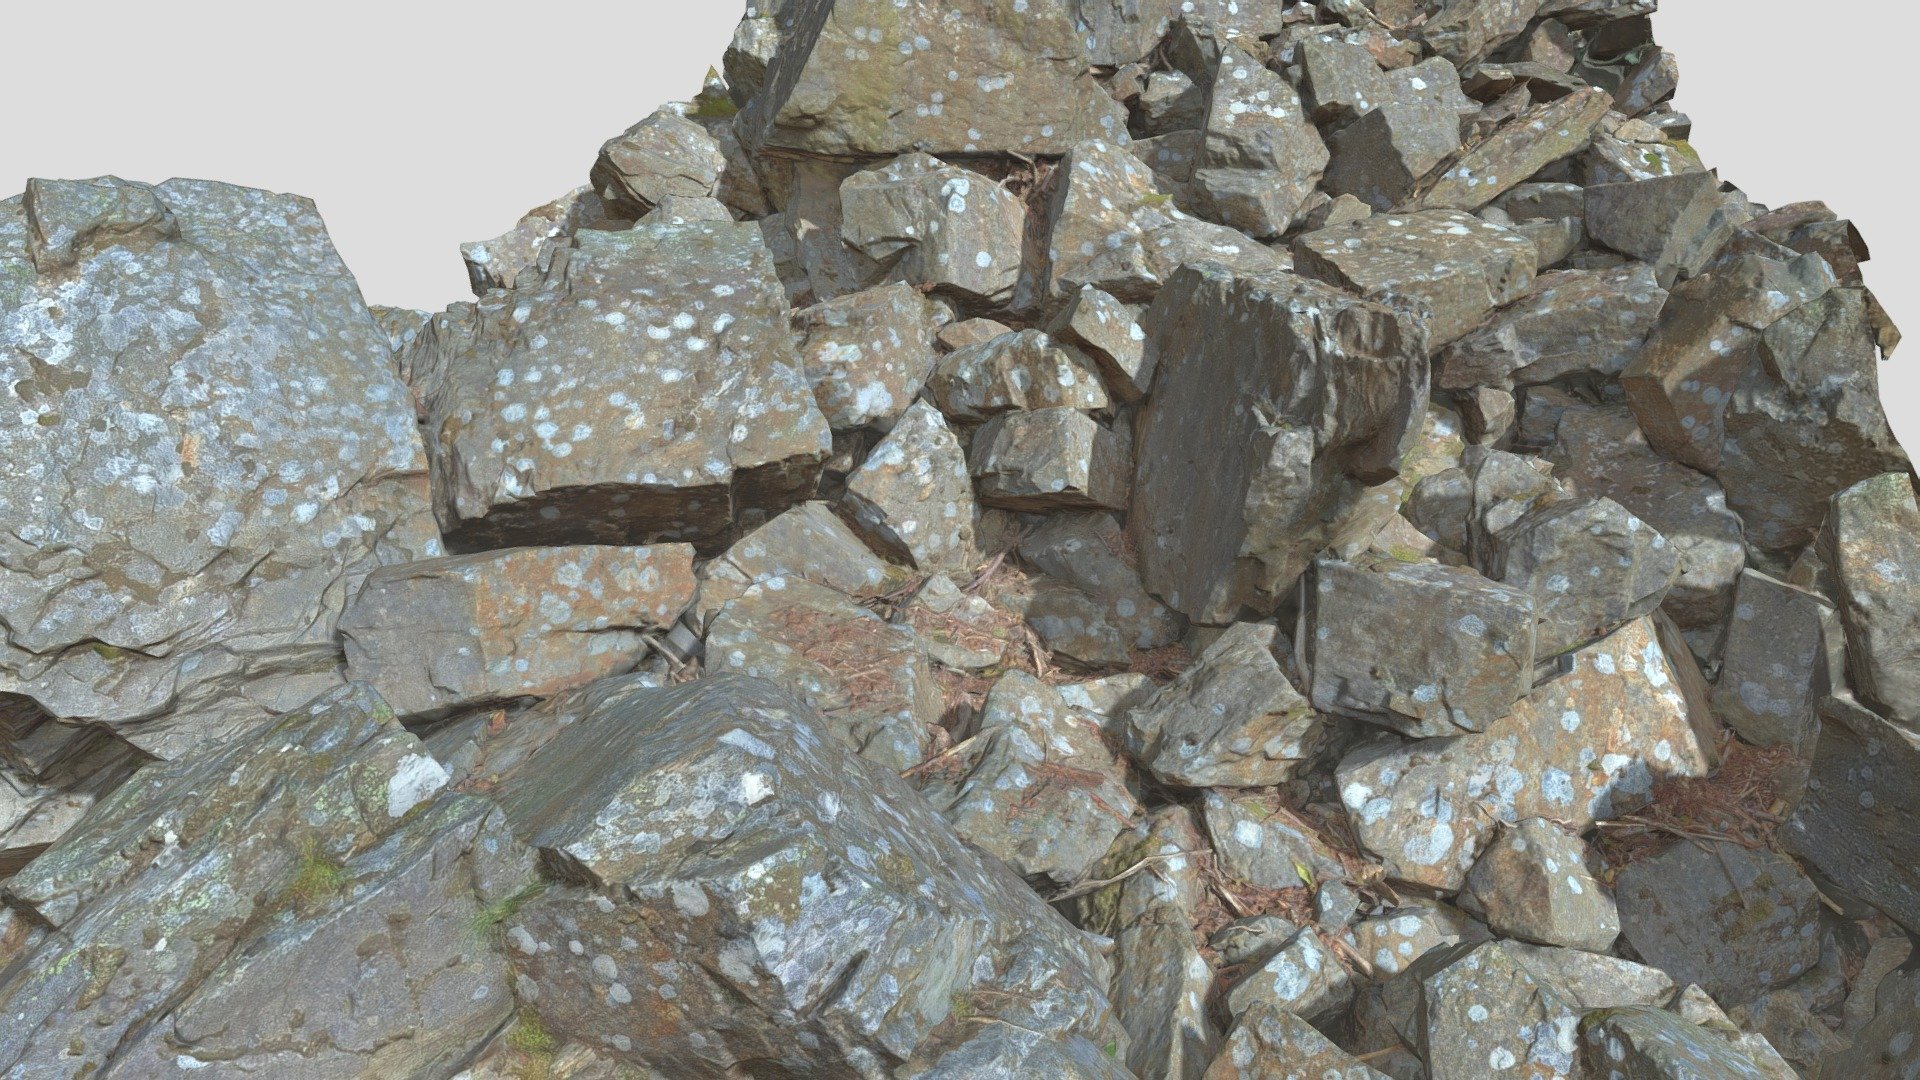 Fully processed 3D scans: no light information, color-matched, etc. 

Ready to use for all kind of CGI

Source Contains:





.blend




.obj




.fbx



8K Textures for each model:





normal




albedo




roughness



Please let me know if something isn’t working as it should.

Realistic Sharp Rock Pile Scan - Sharp Rock Pile Scan - Buy Royalty Free 3D model by Per's Scan Collection (@perz_scans) 3d model